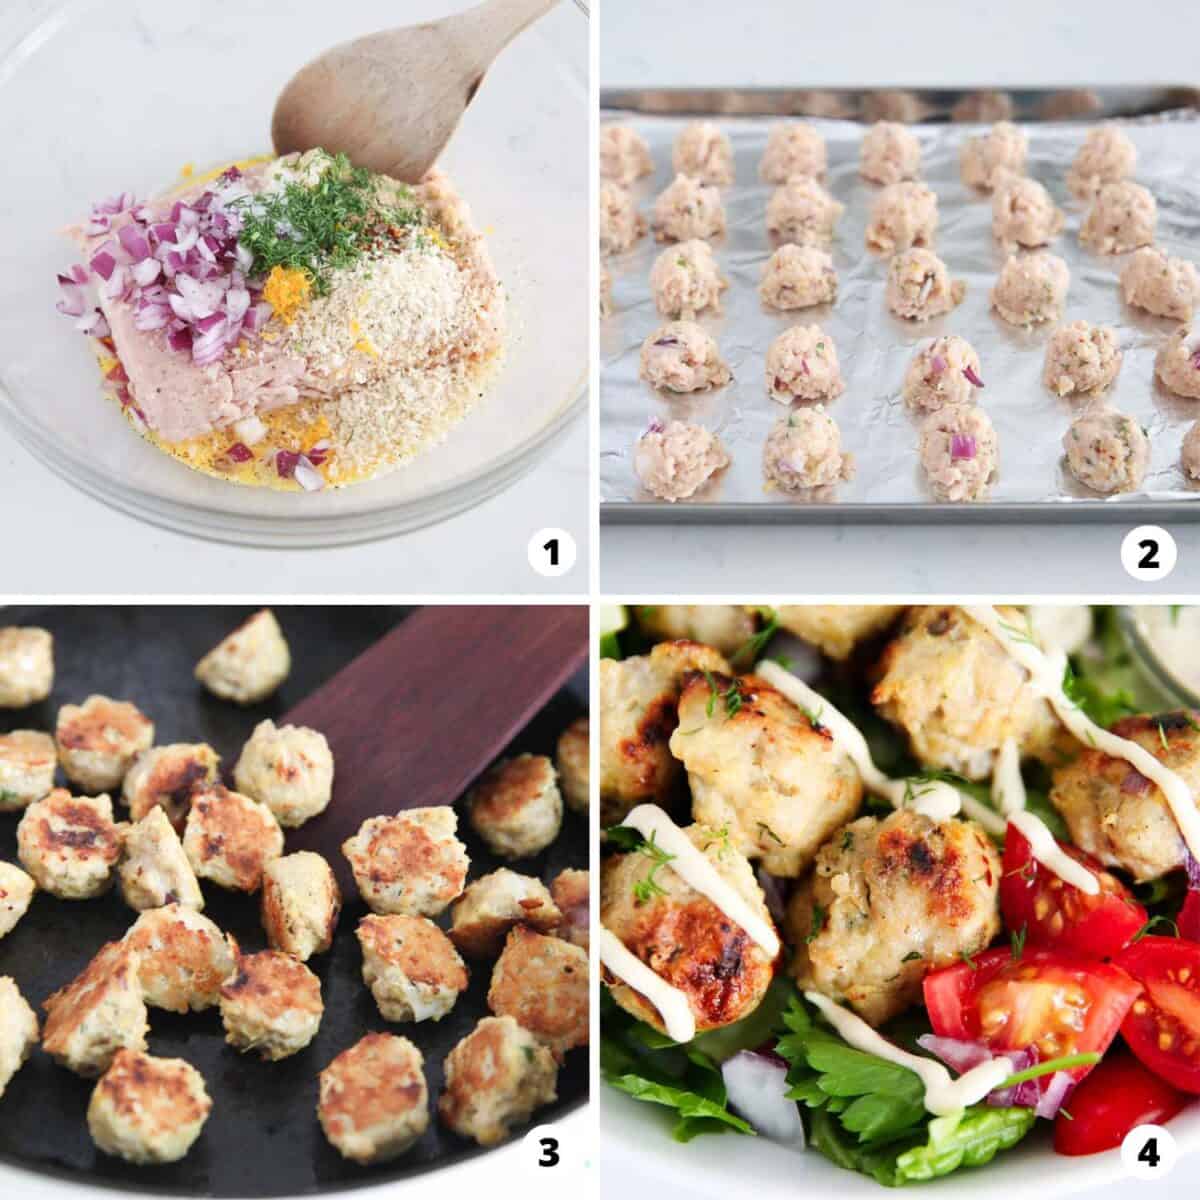 Showing how to make greek chicken meatballs in a 4 step collage.